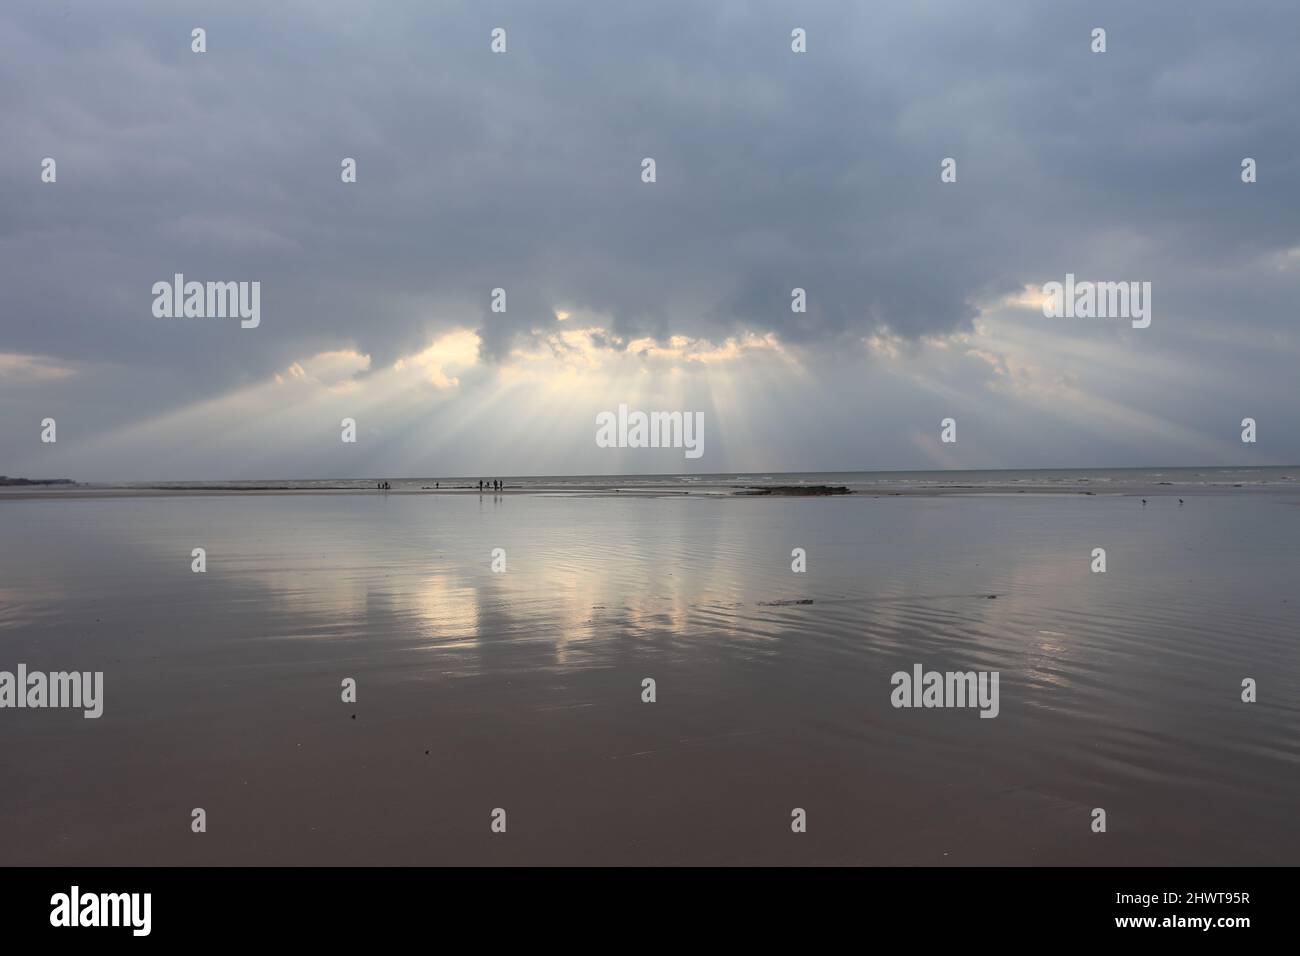 Sunrays reflected on the beach at Bulverhythe at low tide, early in the morning in winter, East Sussex, UK Stock Photo